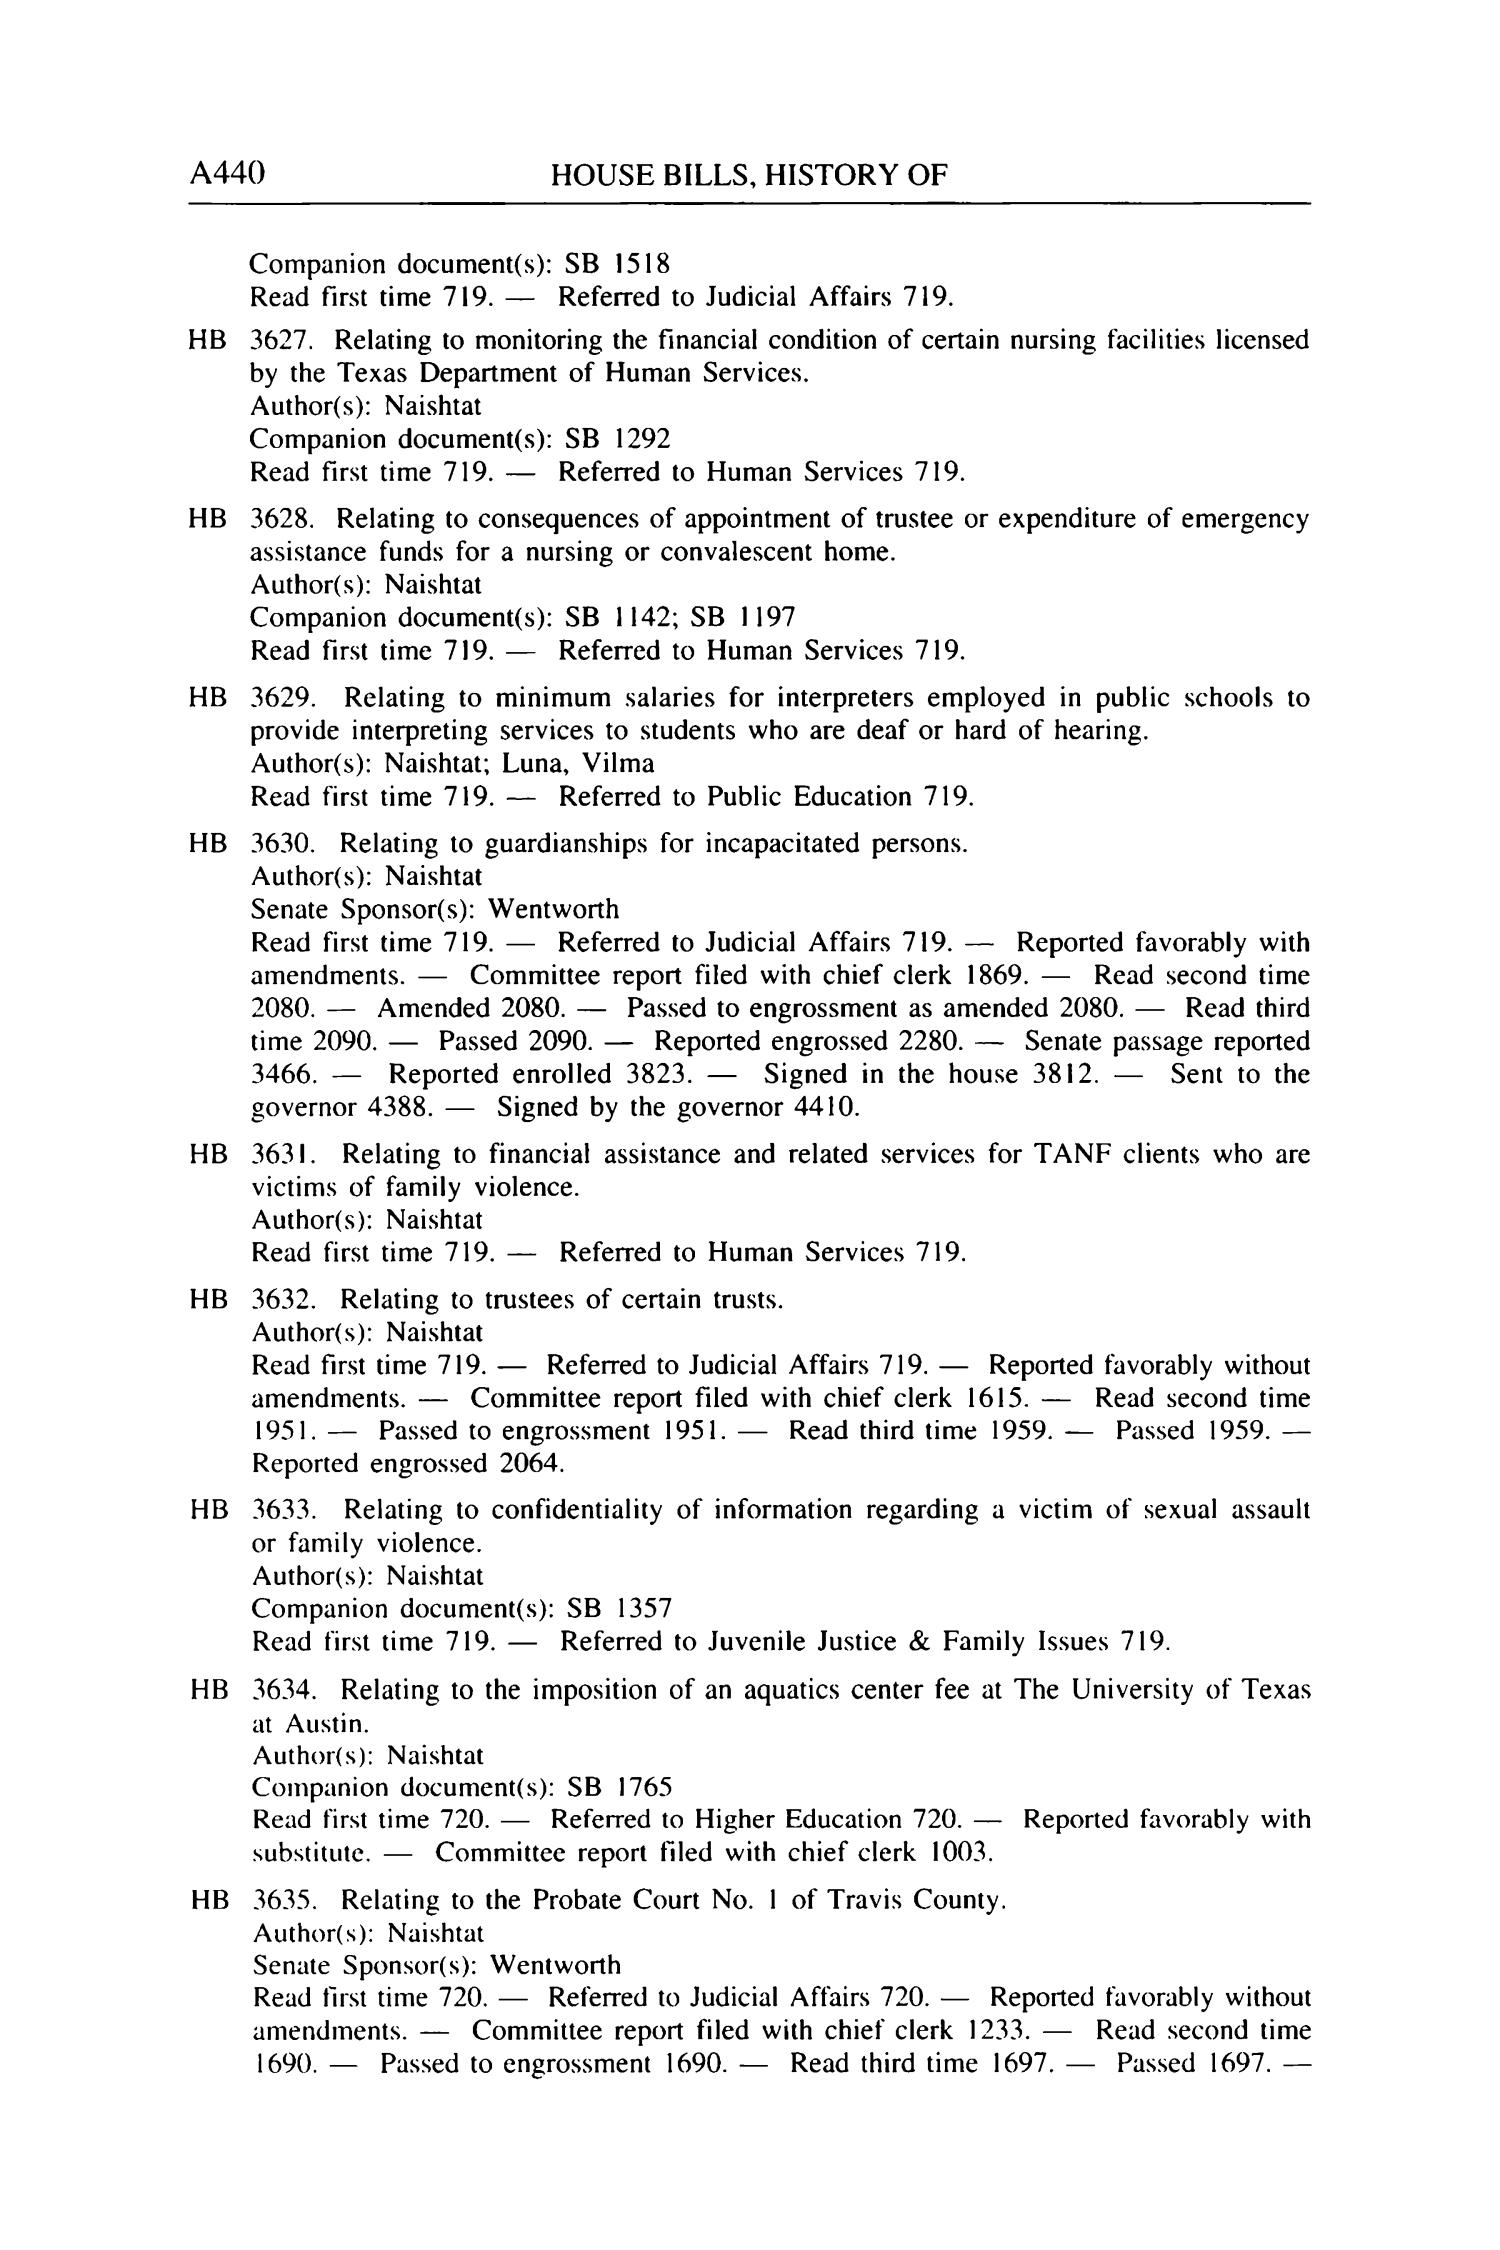 Journal of the House of Representatives of the Regular Session of the Seventy-Sixth Legislature of the State of Texas, Volume 5
                                                
                                                    A440
                                                